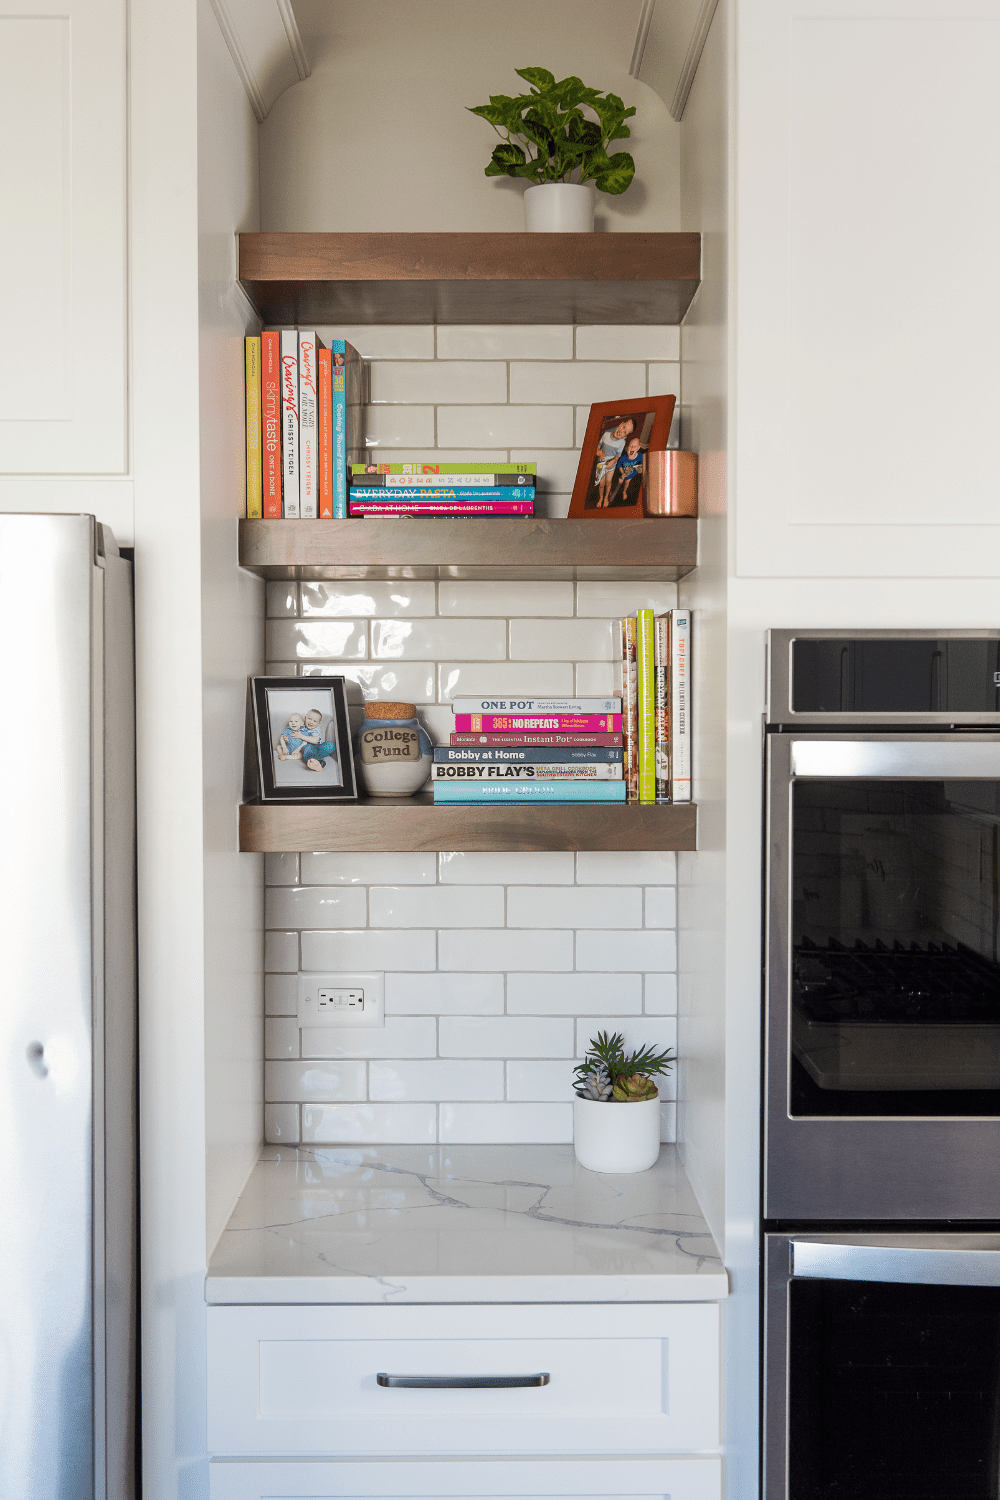 Nicholas Design Build | A white kitchen with bookshelves and a refrigerator.